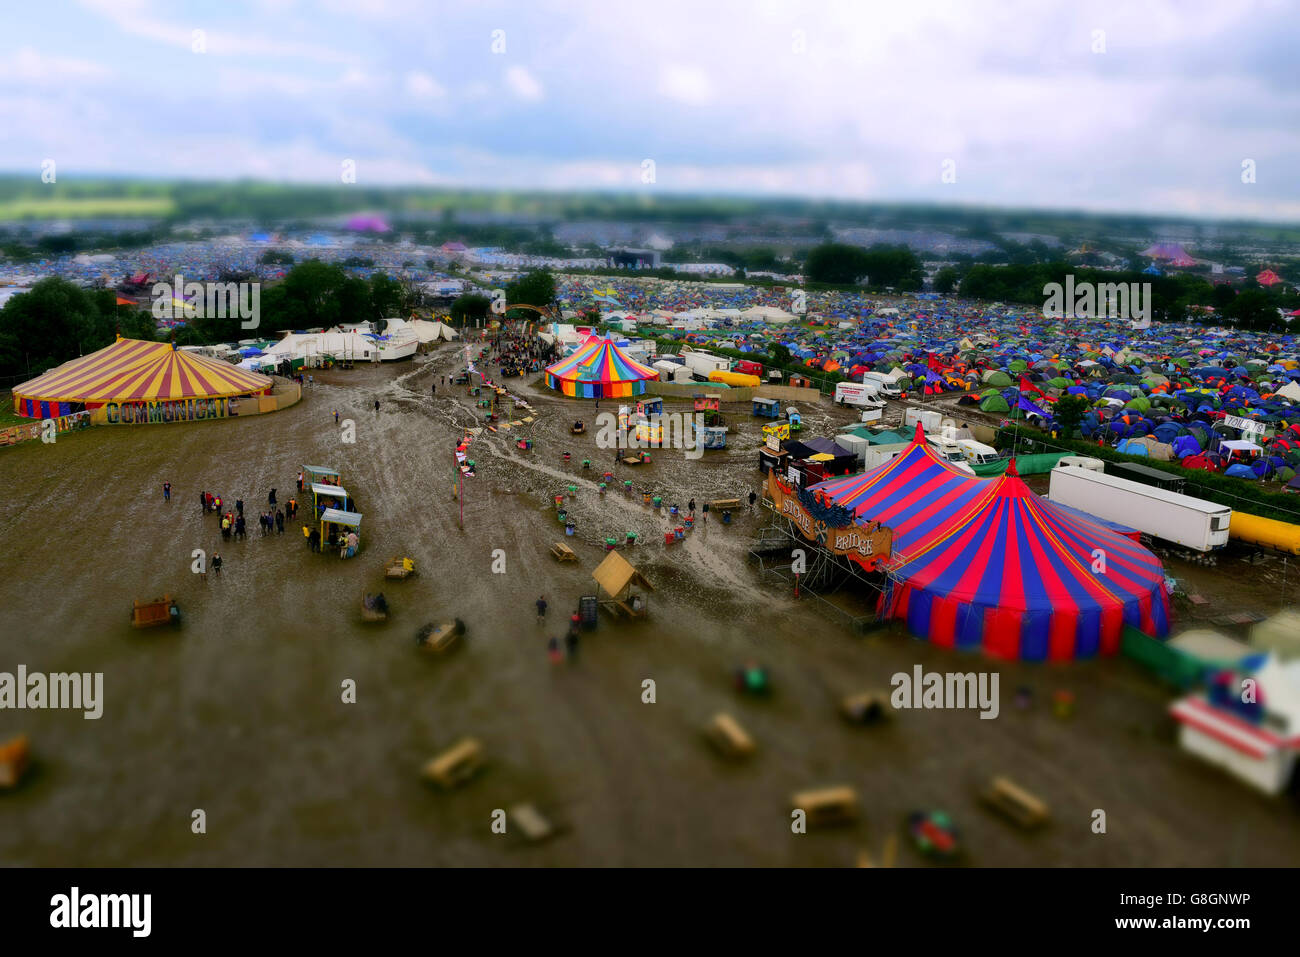 View of the Glastonbury festival from the top of the Ribbon Tower in the Park Area of the site Stock Photo